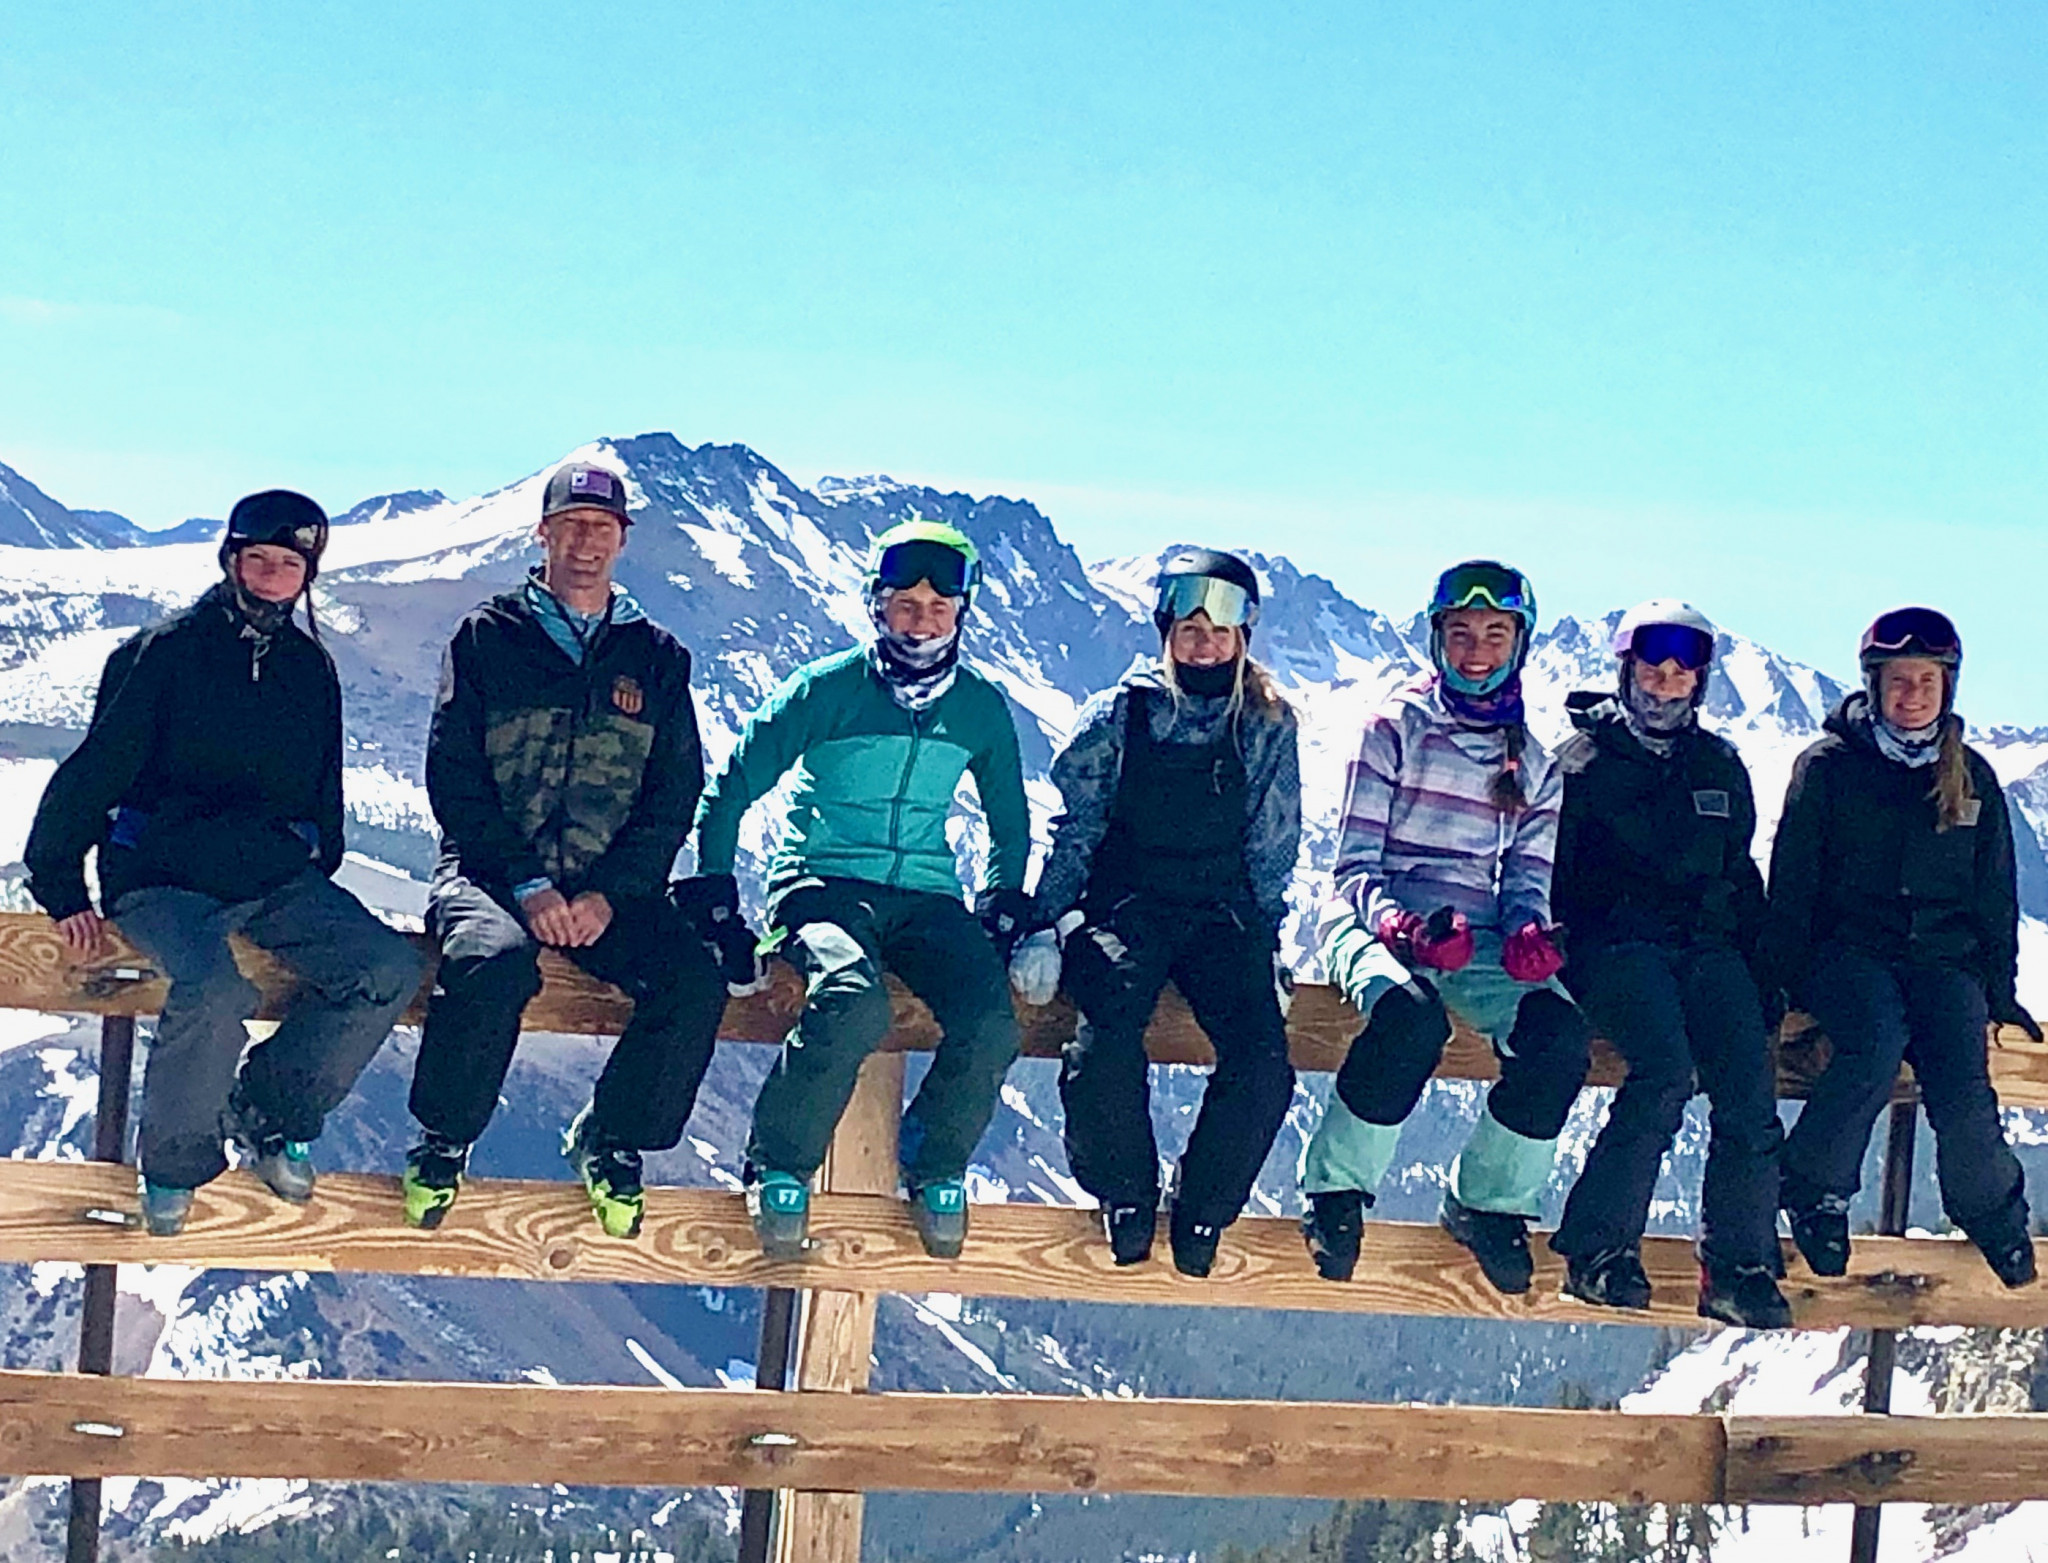 Young American freeskiers and snowboarders experience Project Gold with Olympic coaches and facilities